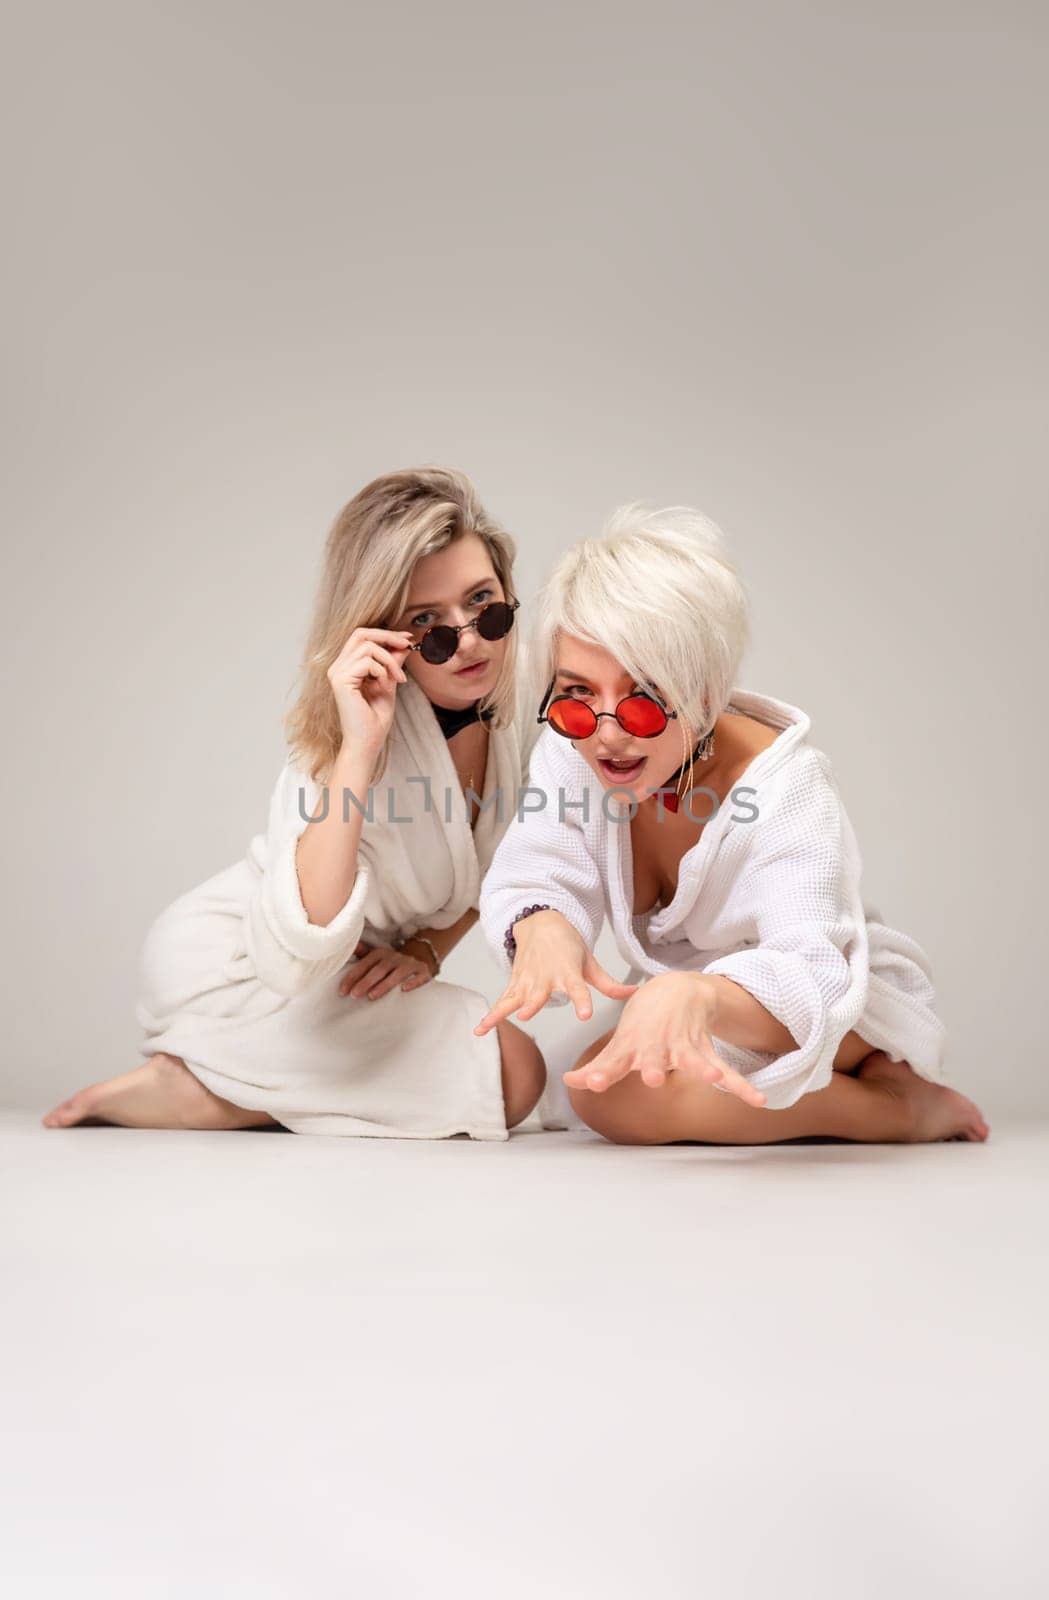 two girls in white coats and glasses are having fun with emotions sitting in the studio on a white background of a copy paste